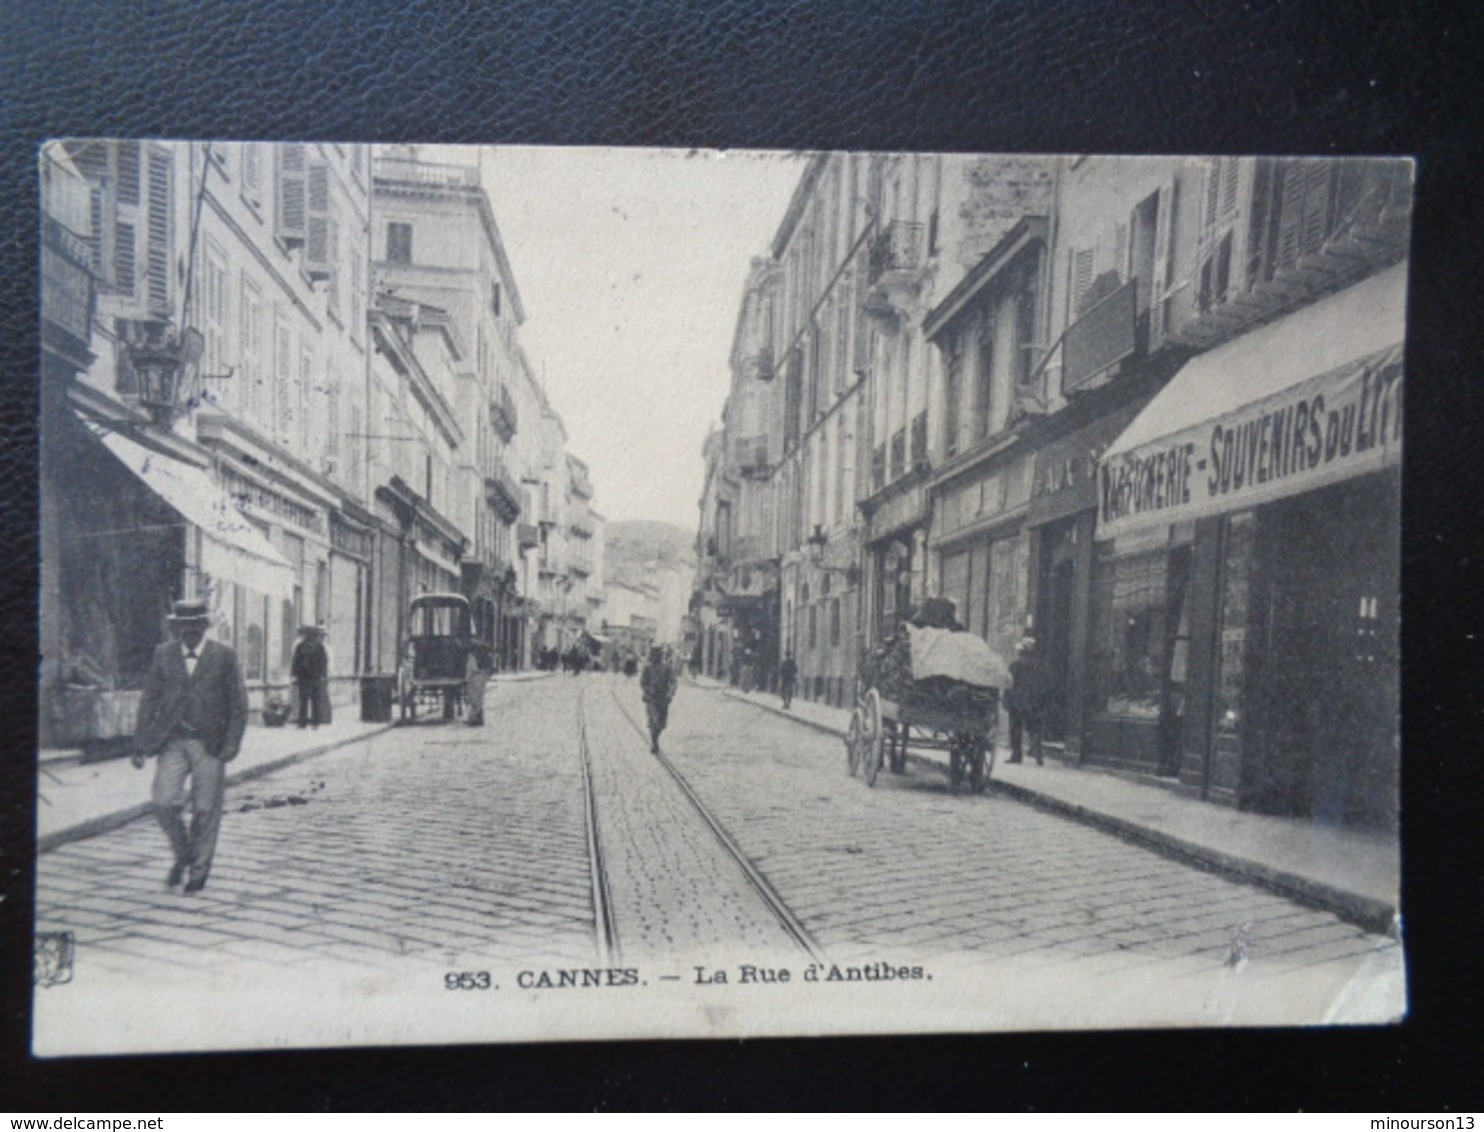 CANNE : LA RUE D'ANTIBES - Cannes